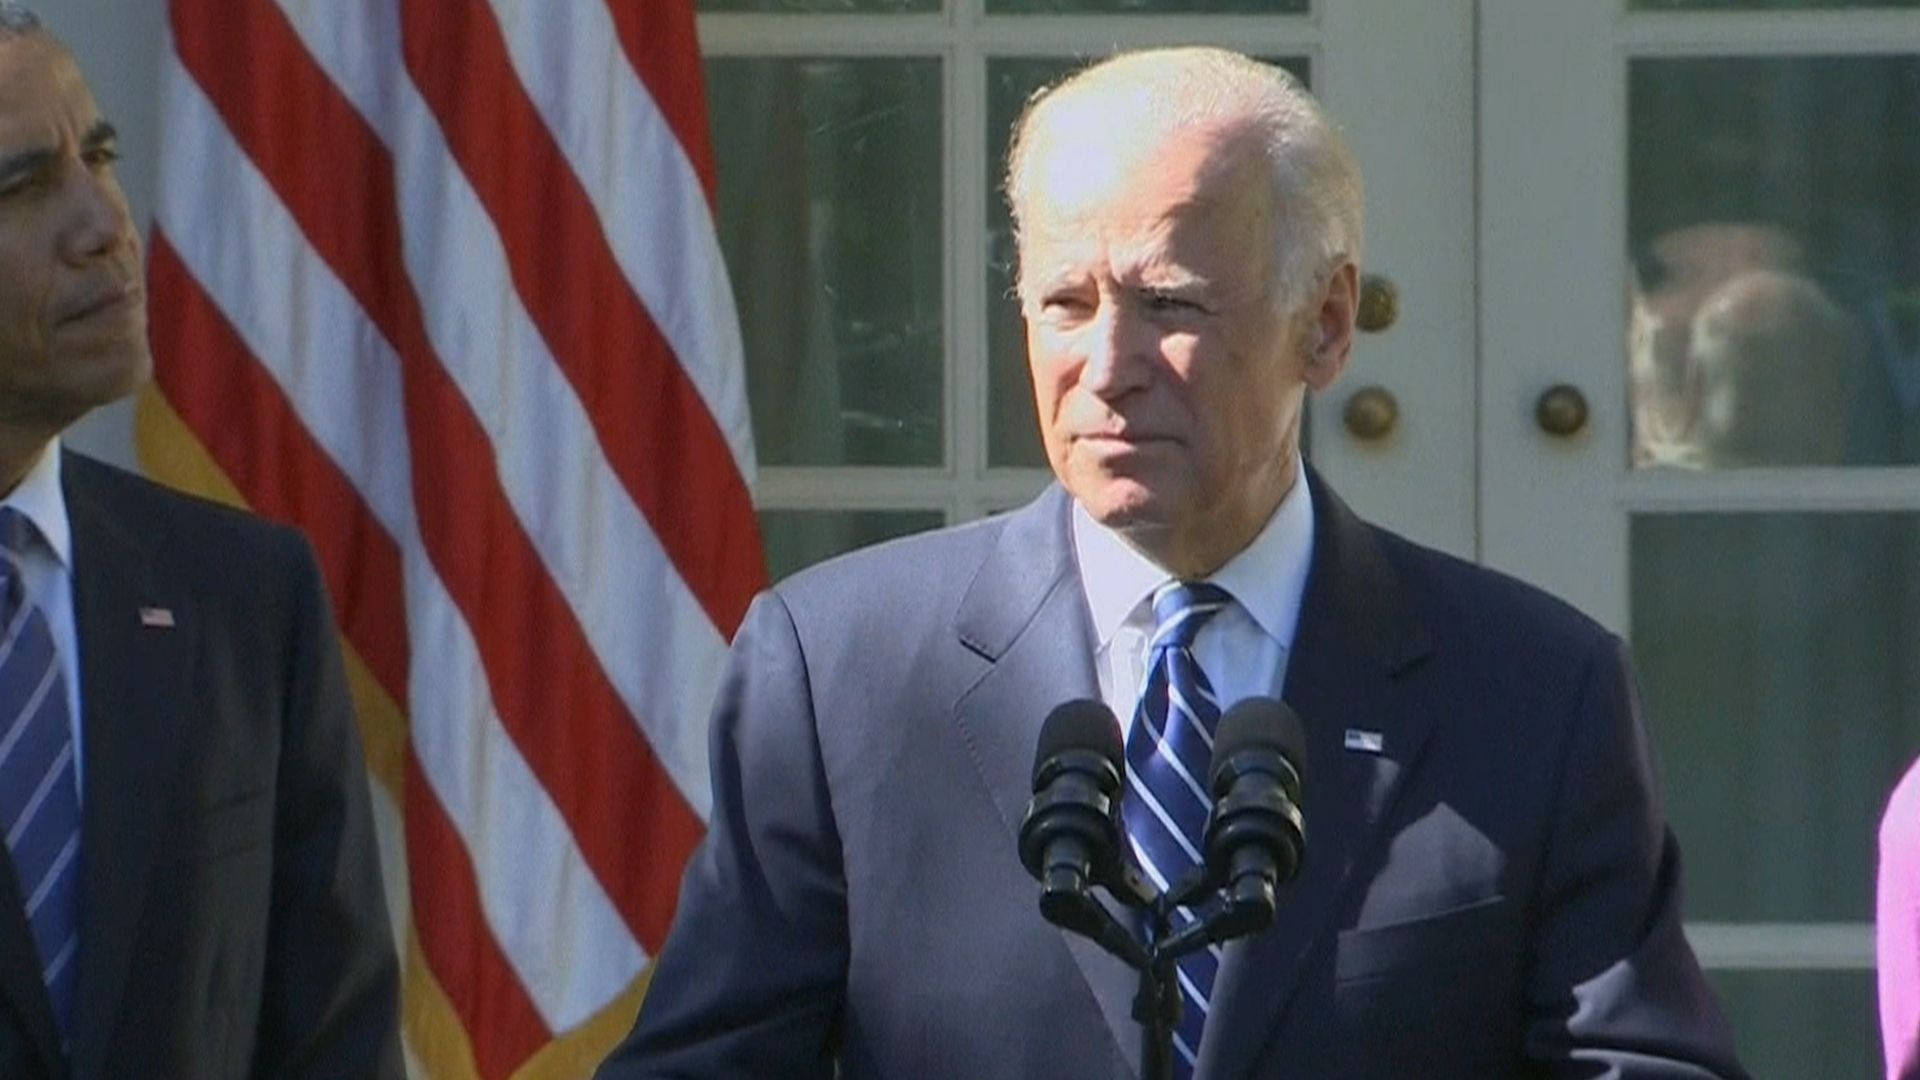 Joe Biden Delivers An Empowering Speech To A Crowd In The Morning. Background